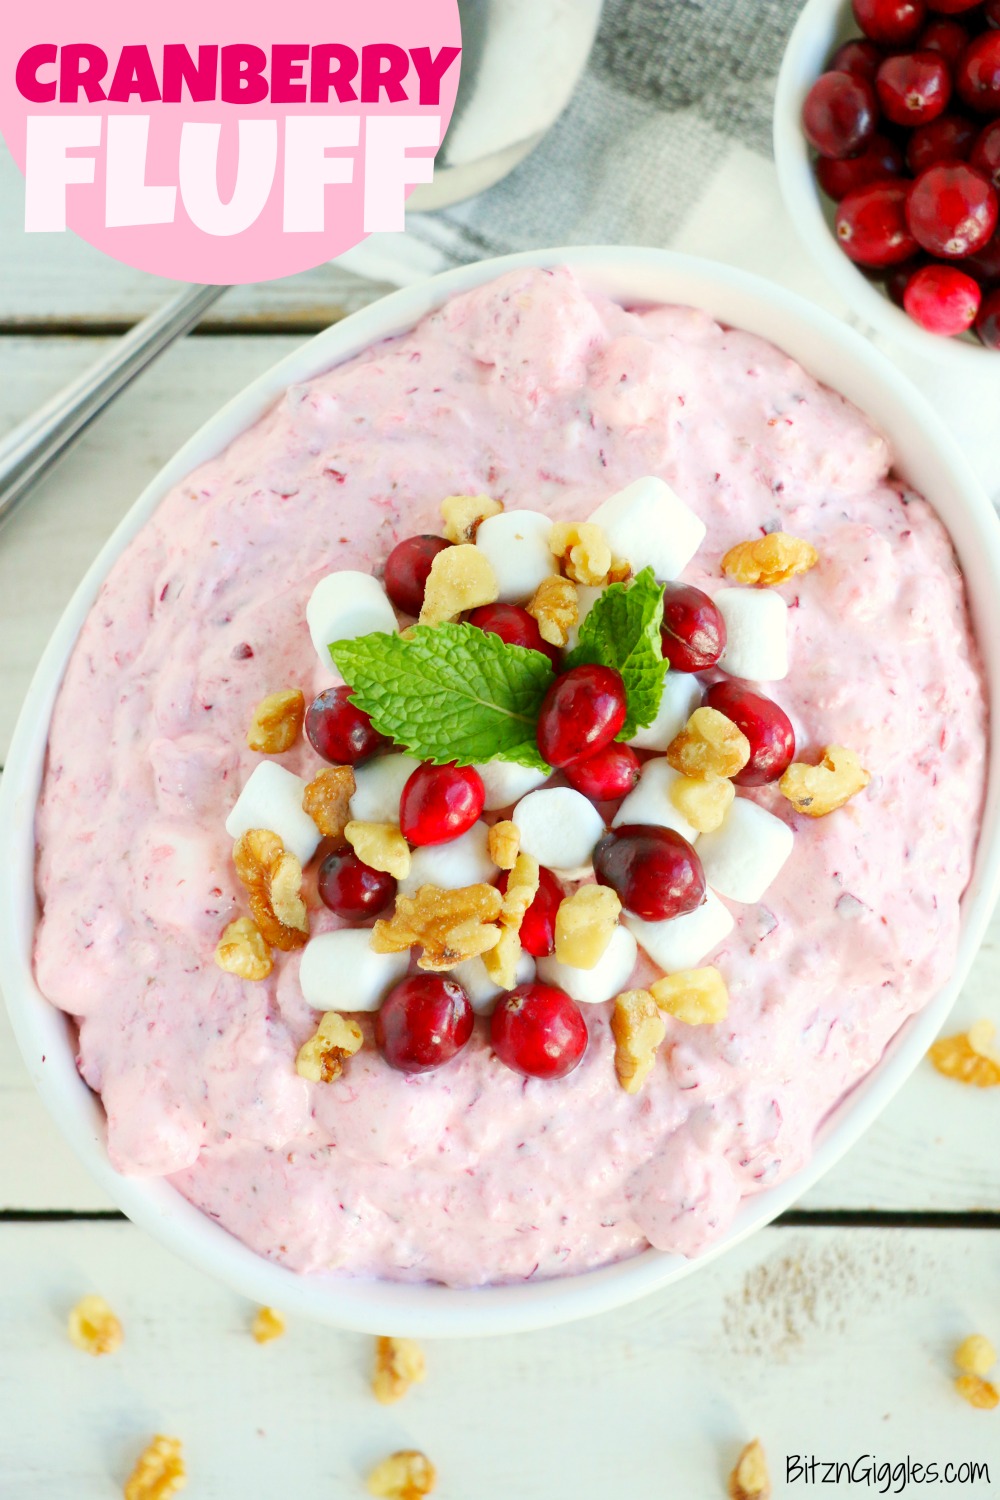 Cranberry Fluff - Tangy, chilled cranberries and sweet crushed pineapple, folded into marshmallow-filled whipped cream makes this side dish a family favorite!